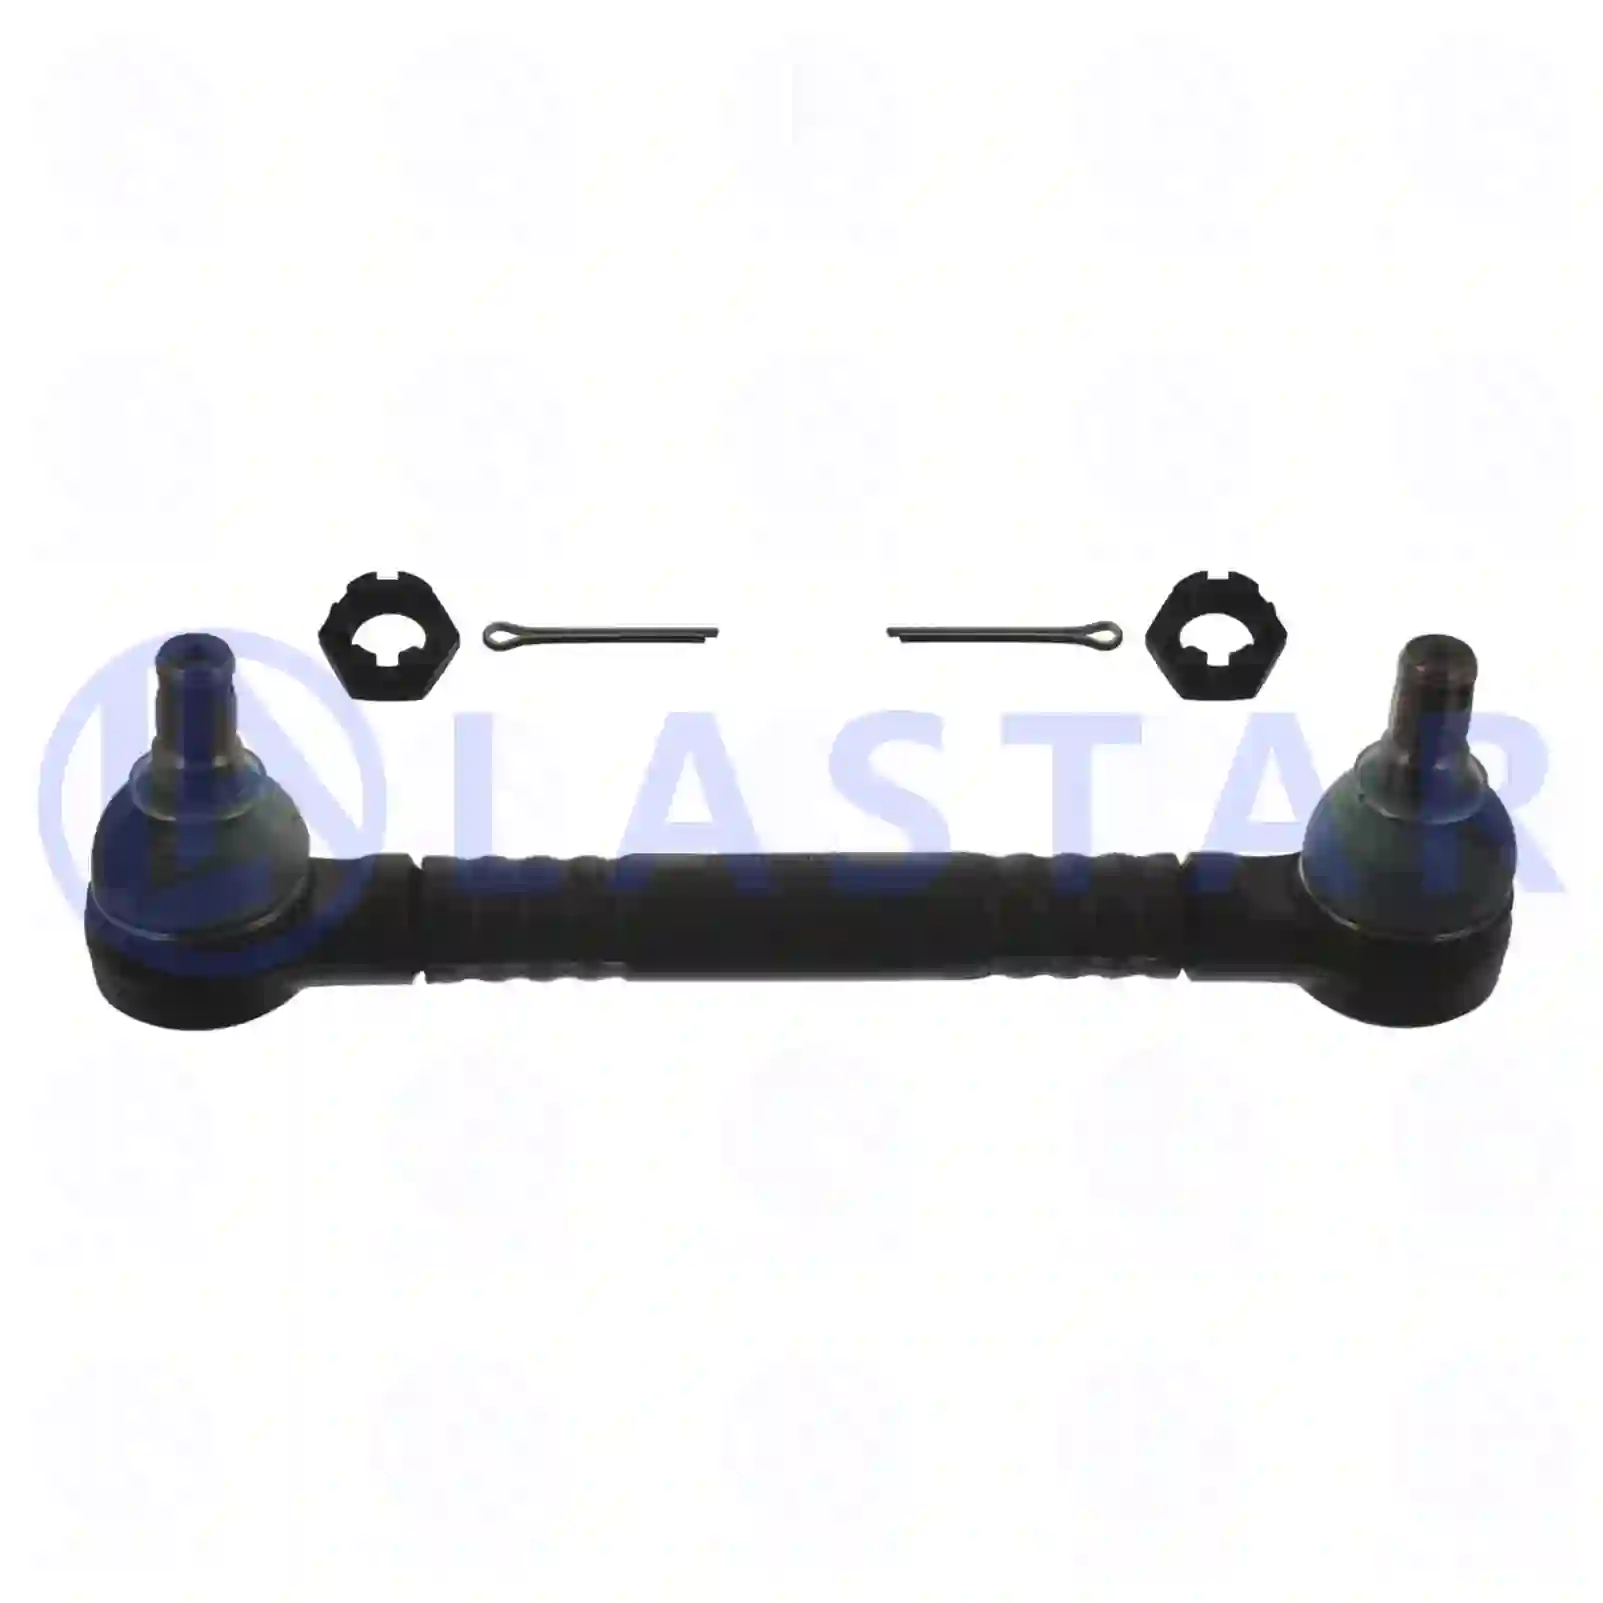 Stabilizer stay, 77727208, 7420477803, 20477803, 3987423, ZG41773-0008, ||  77727208 Lastar Spare Part | Truck Spare Parts, Auotomotive Spare Parts Stabilizer stay, 77727208, 7420477803, 20477803, 3987423, ZG41773-0008, ||  77727208 Lastar Spare Part | Truck Spare Parts, Auotomotive Spare Parts